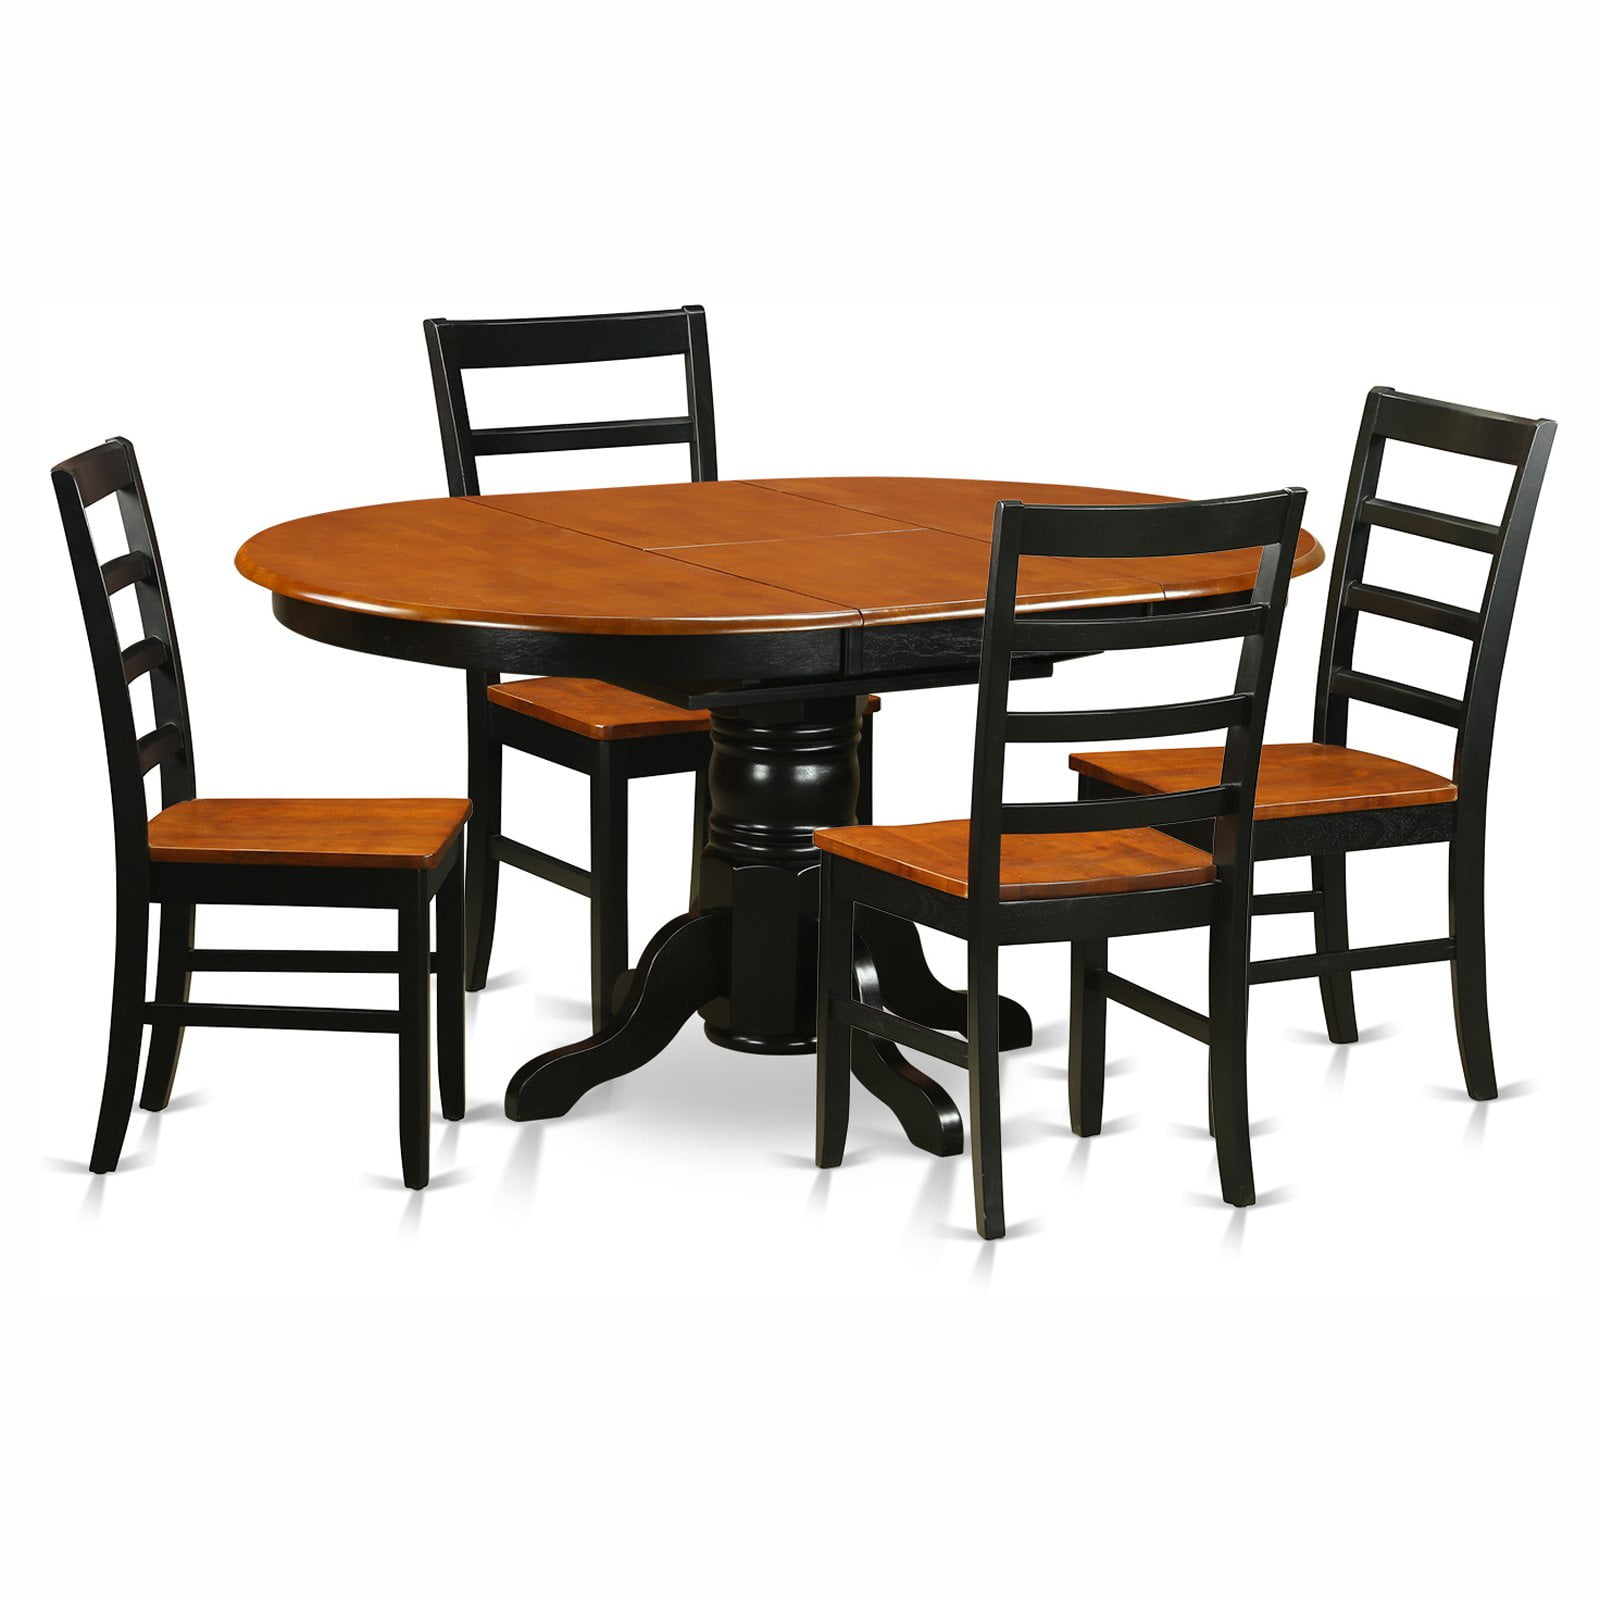 Avon 5 Piece Pedestal Oval Dining Table, Pedestal Dining Room Tables And Chairs